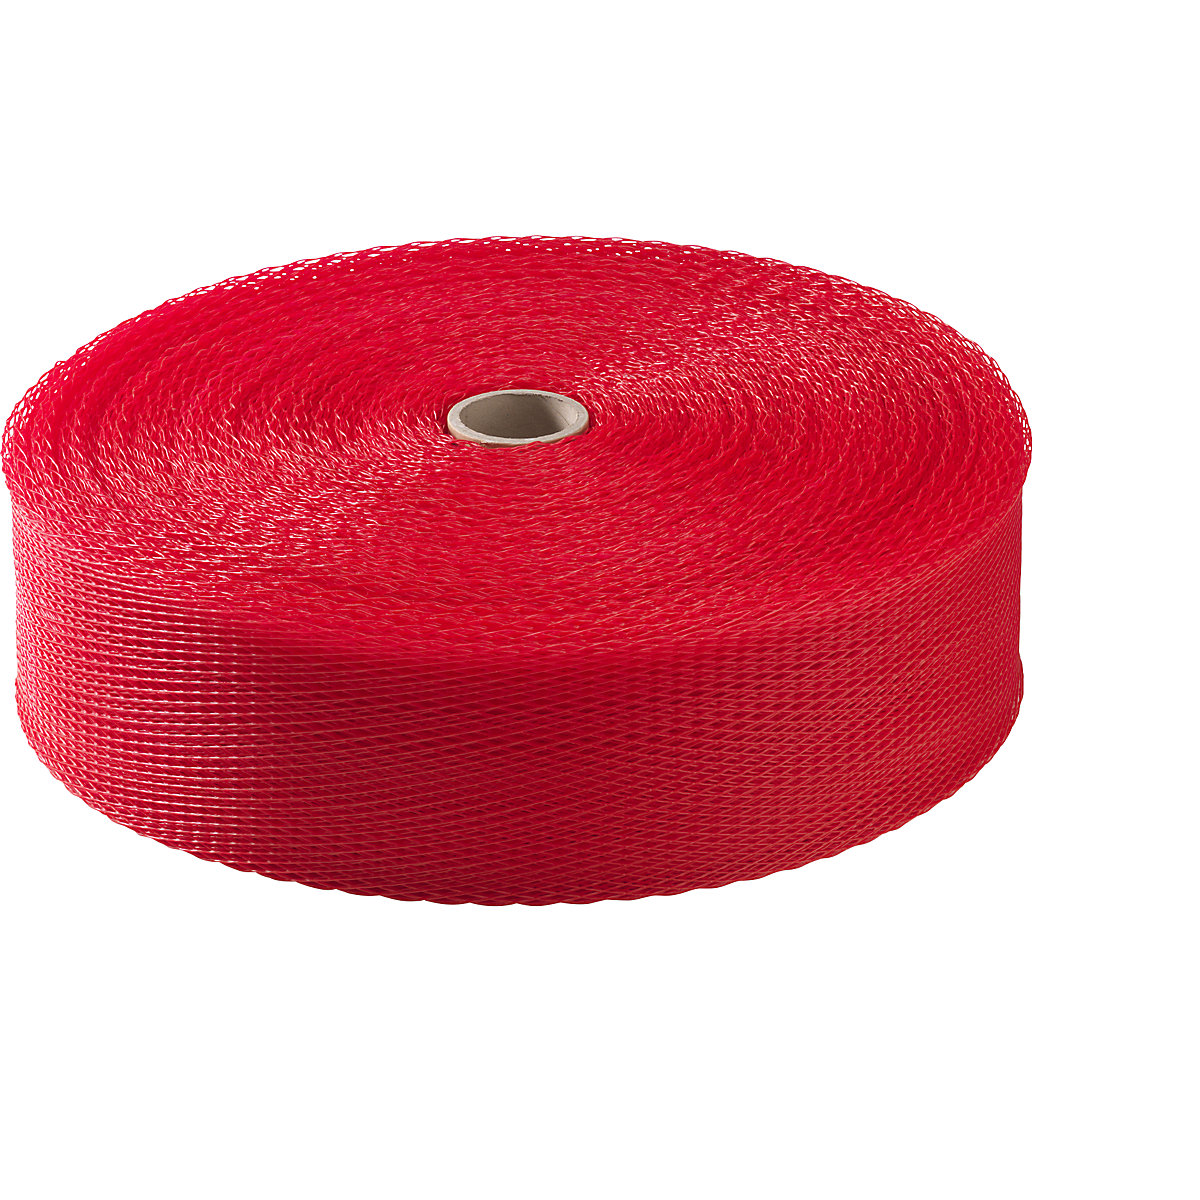 Surface protection net, polyethylene, 1 roll, red, for Ø 200 – 250 mm